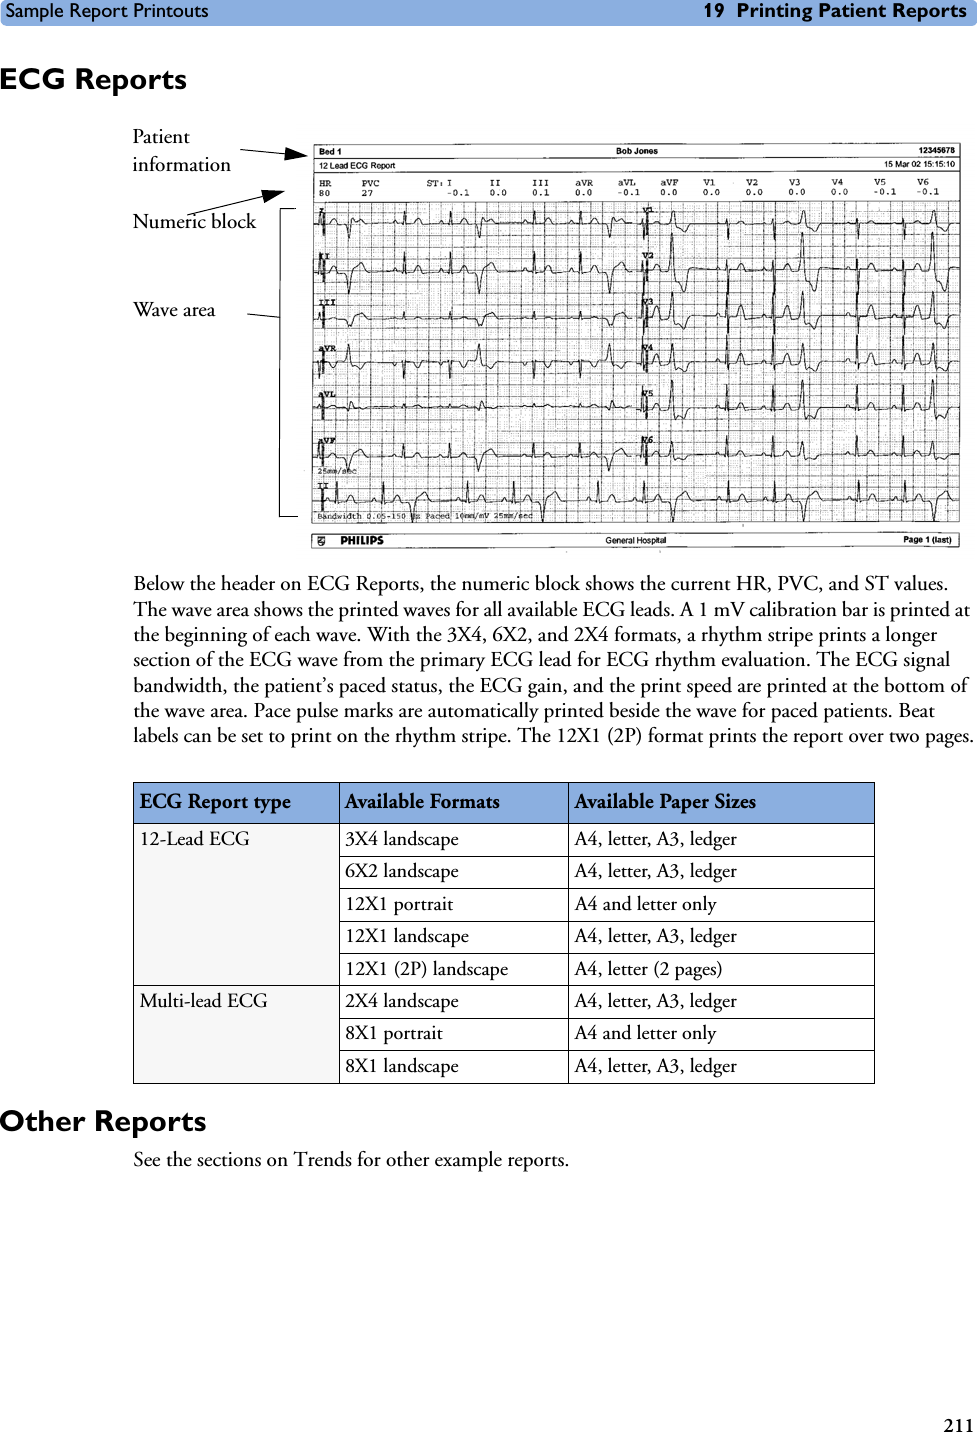 Sample Report Printouts 19 Printing Patient Reports211ECG ReportsBelow the header on ECG Reports, the numeric block shows the current HR, PVC, and ST values. The wave area shows the printed waves for all available ECG leads. A 1 mV calibration bar is printed at the beginning of each wave. With the 3X4, 6X2, and 2X4 formats, a rhythm stripe prints a longer section of the ECG wave from the primary ECG lead for ECG rhythm evaluation. The ECG signal bandwidth, the patient’s paced status, the ECG gain, and the print speed are printed at the bottom of the wave area. Pace pulse marks are automatically printed beside the wave for paced patients. Beat labels can be set to print on the rhythm stripe. The 12X1 (2P) format prints the report over two pages.Other ReportsSee the sections on Trends for other example reports.ECG Report type Available Formats Available Paper Sizes12-Lead ECG 3X4 landscape A4, letter, A3, ledger6X2 landscape A4, letter, A3, ledger12X1 portrait A4 and letter only12X1 landscape A4, letter, A3, ledger12X1 (2P) landscape A4, letter (2 pages)Multi-lead ECG 2X4 landscape A4, letter, A3, ledger8X1 portrait A4 and letter only8X1 landscape A4, letter, A3, ledgerPatient informationNumeric blockWave area